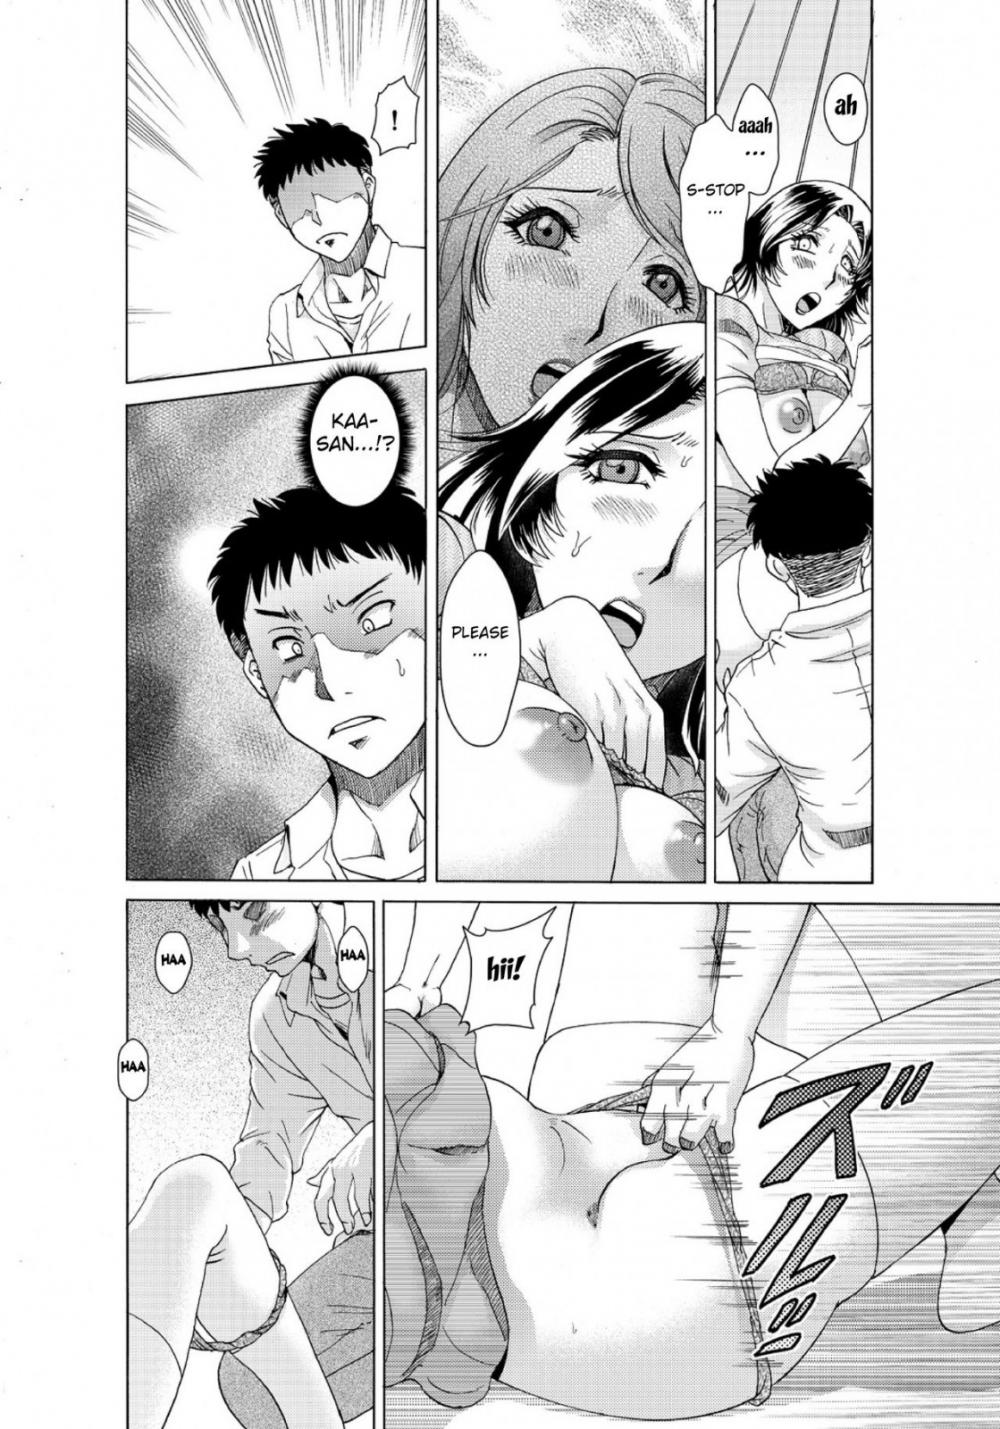 Hentai Manga Comic-The Son's Mom-Play ~She'll Looks At Her Son Sexually As She Thrusts Her Hips-Read-21